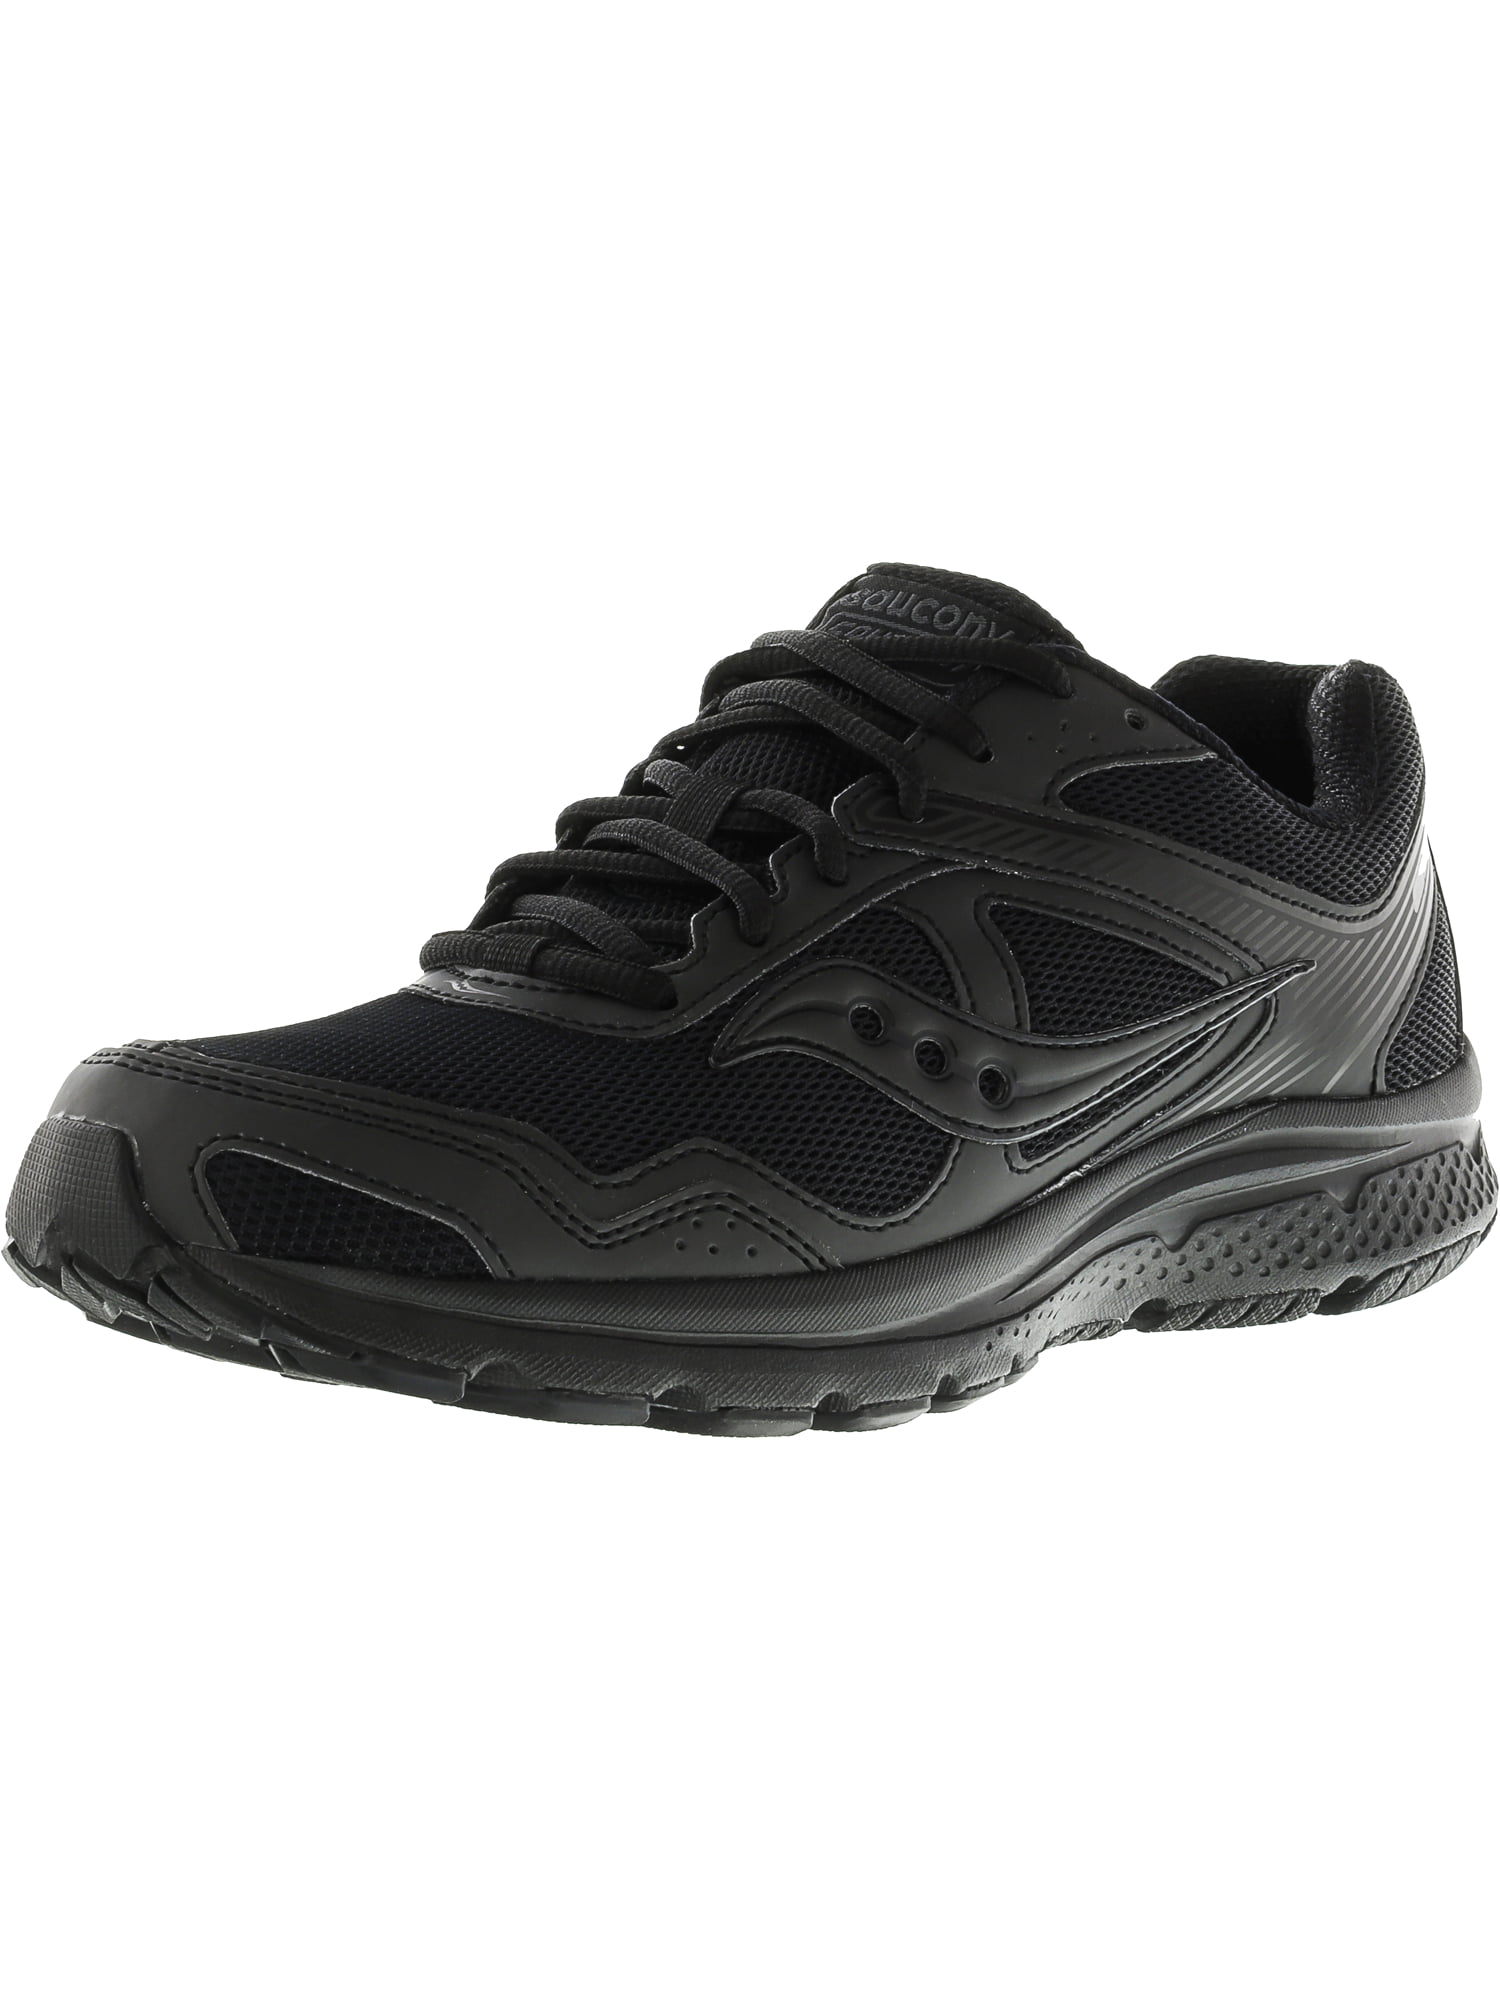 saucony grid cohesion 10 wide men's running shoes